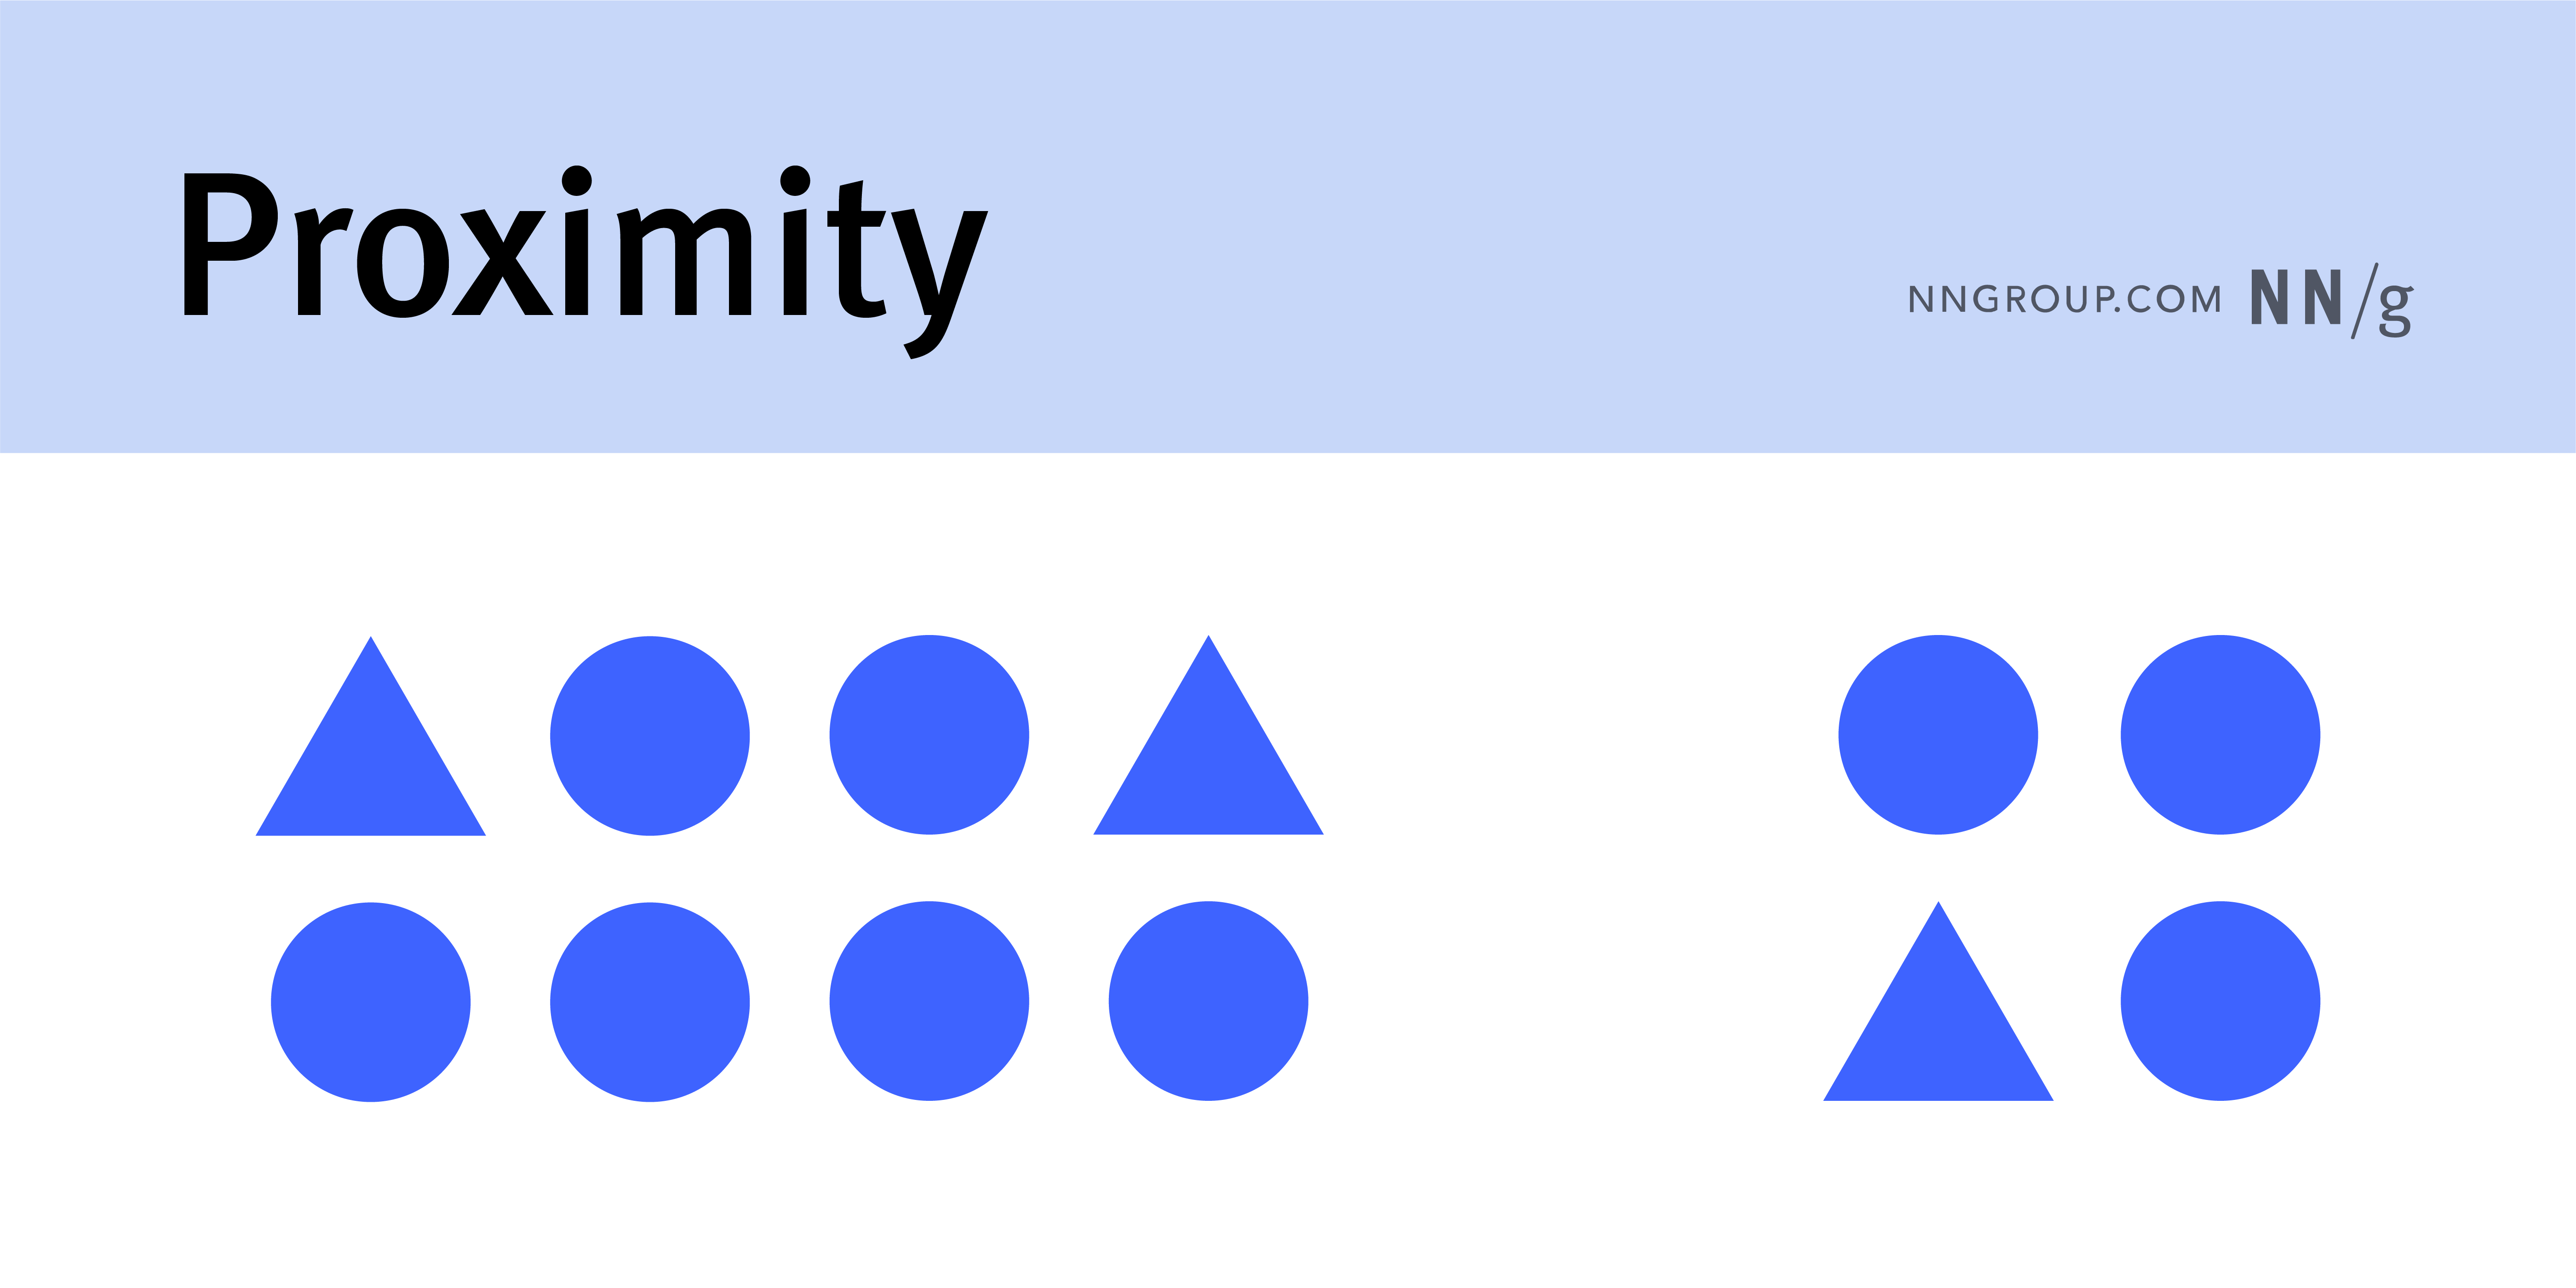 Two groups of blue geometric shapes (circles and triangles)